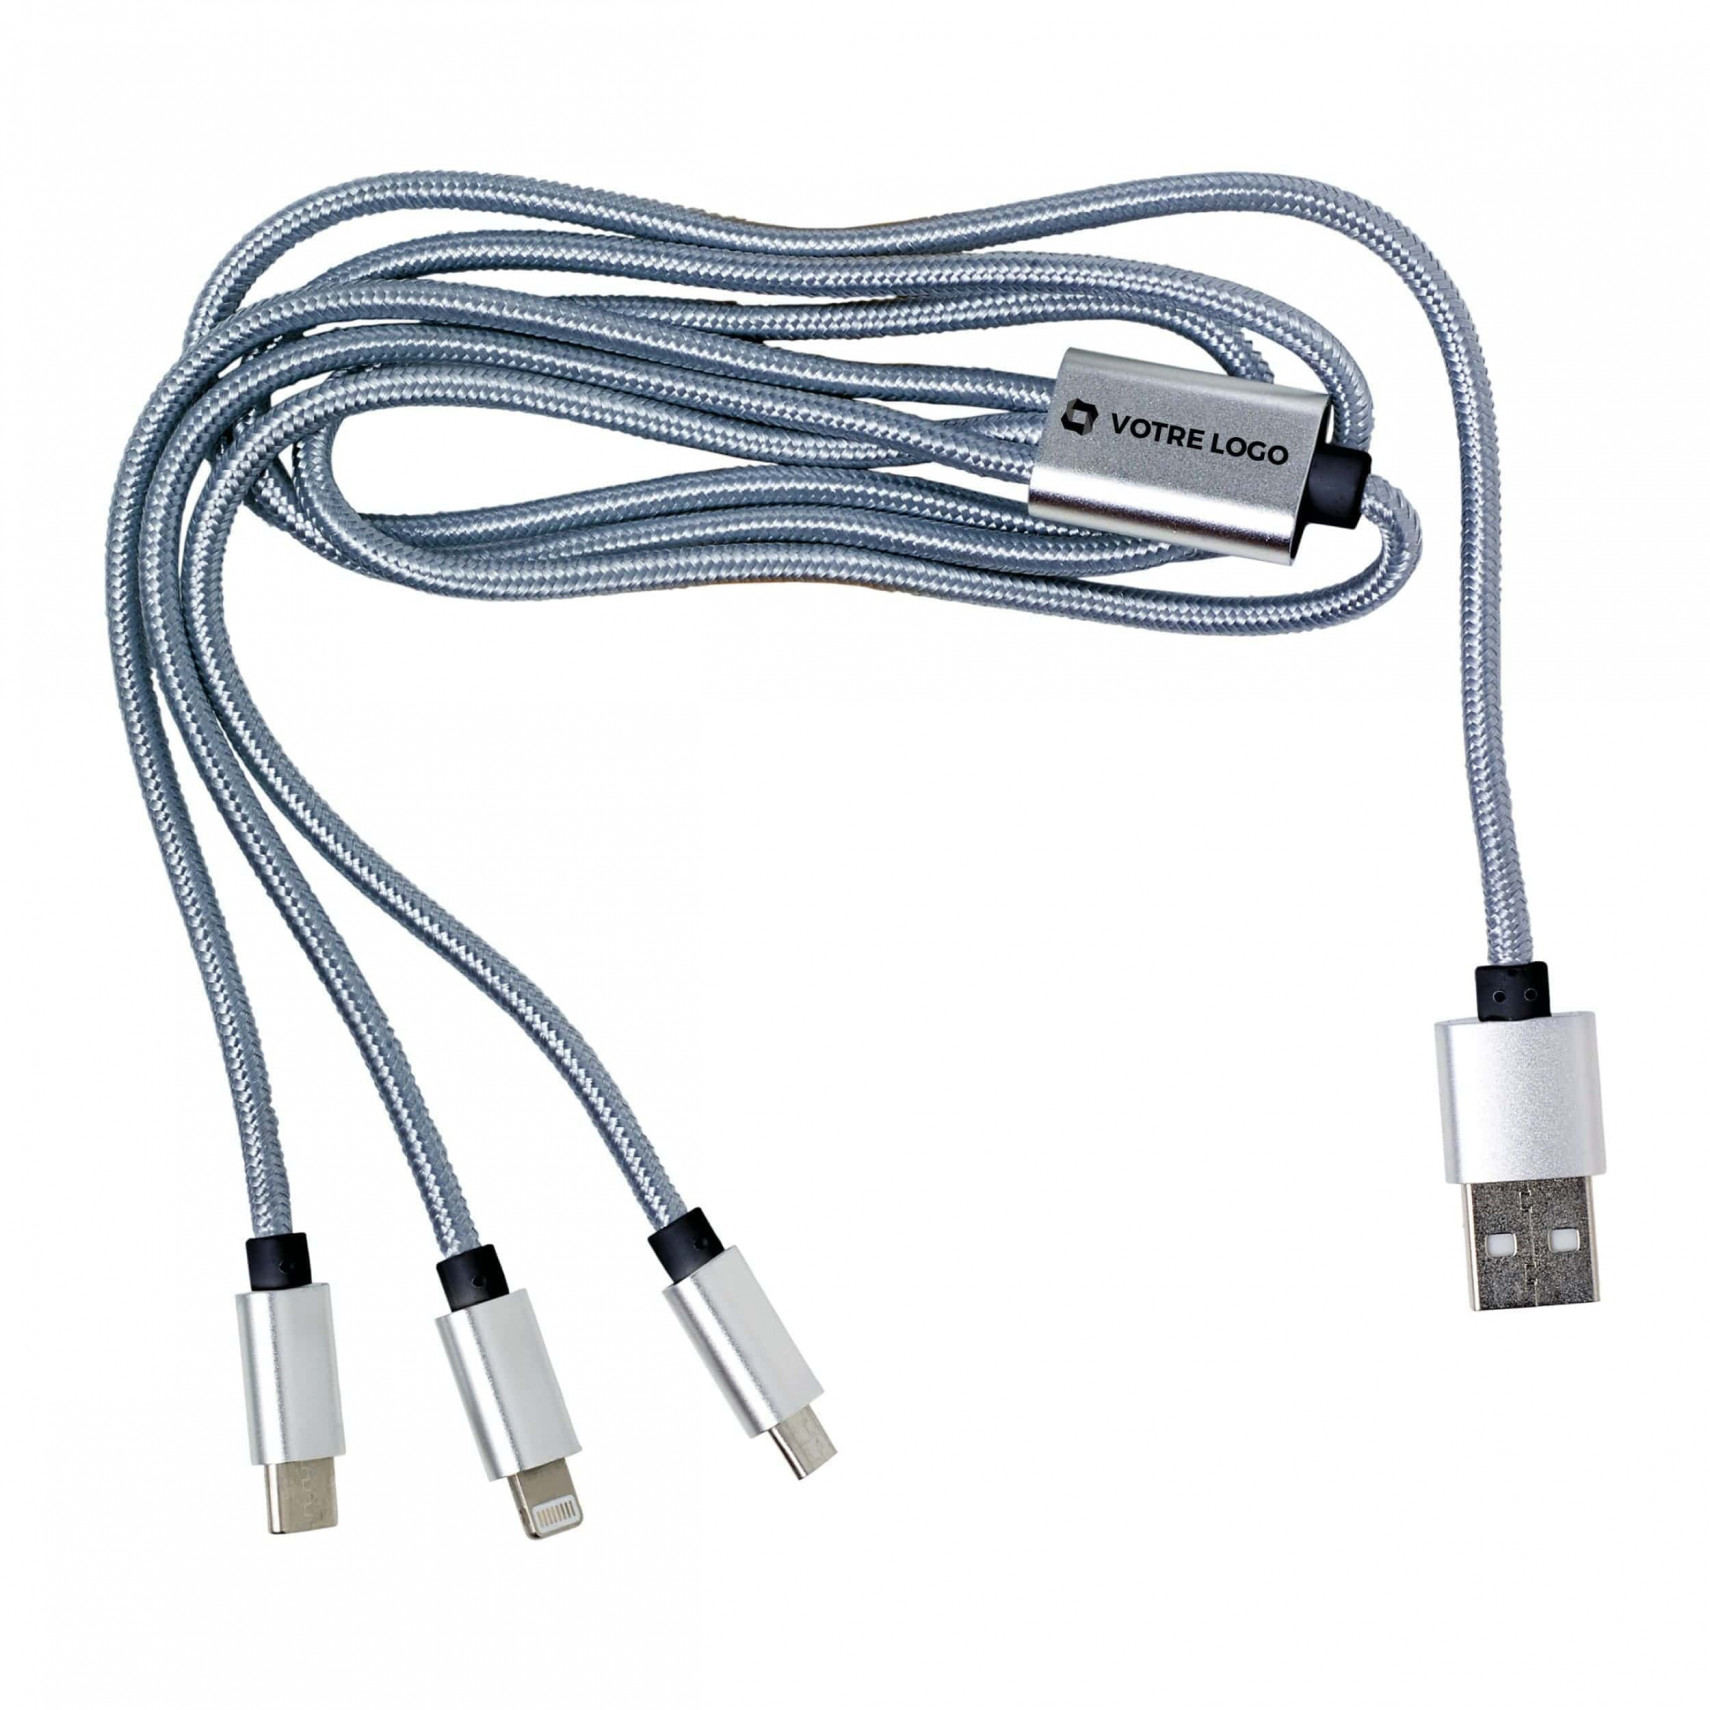 https://www.drivecase.fr/409305-product_zoom_2x/cable-multi-usb-personnalise.jpg